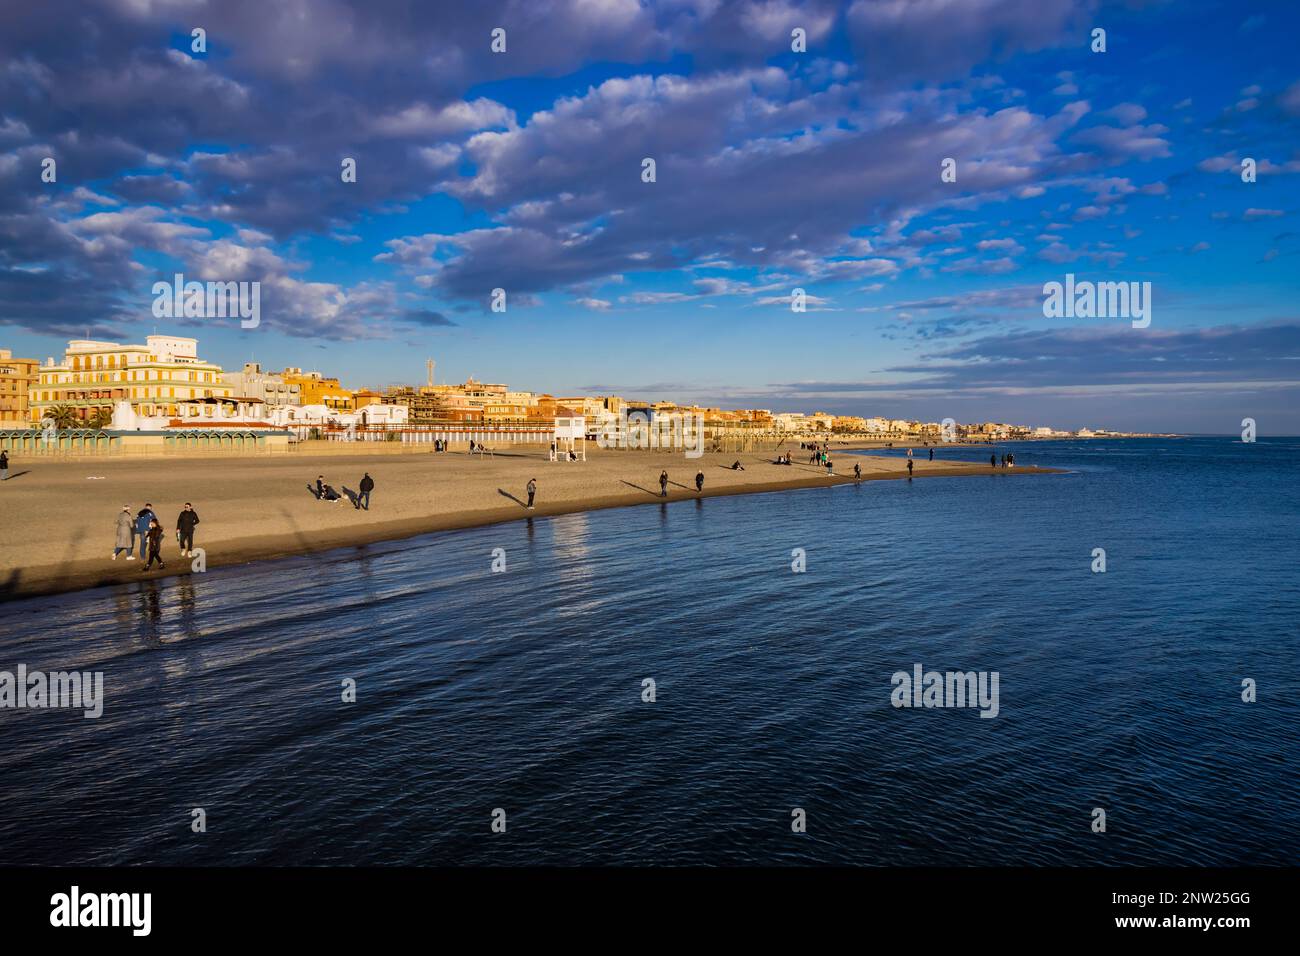 February 12, 2023 - Ostia, Rome, Italy. The sea of Ostia, on the Roman coast, on a winter Sunday. People enjoy the public holiday by walking on the be Stock Photo